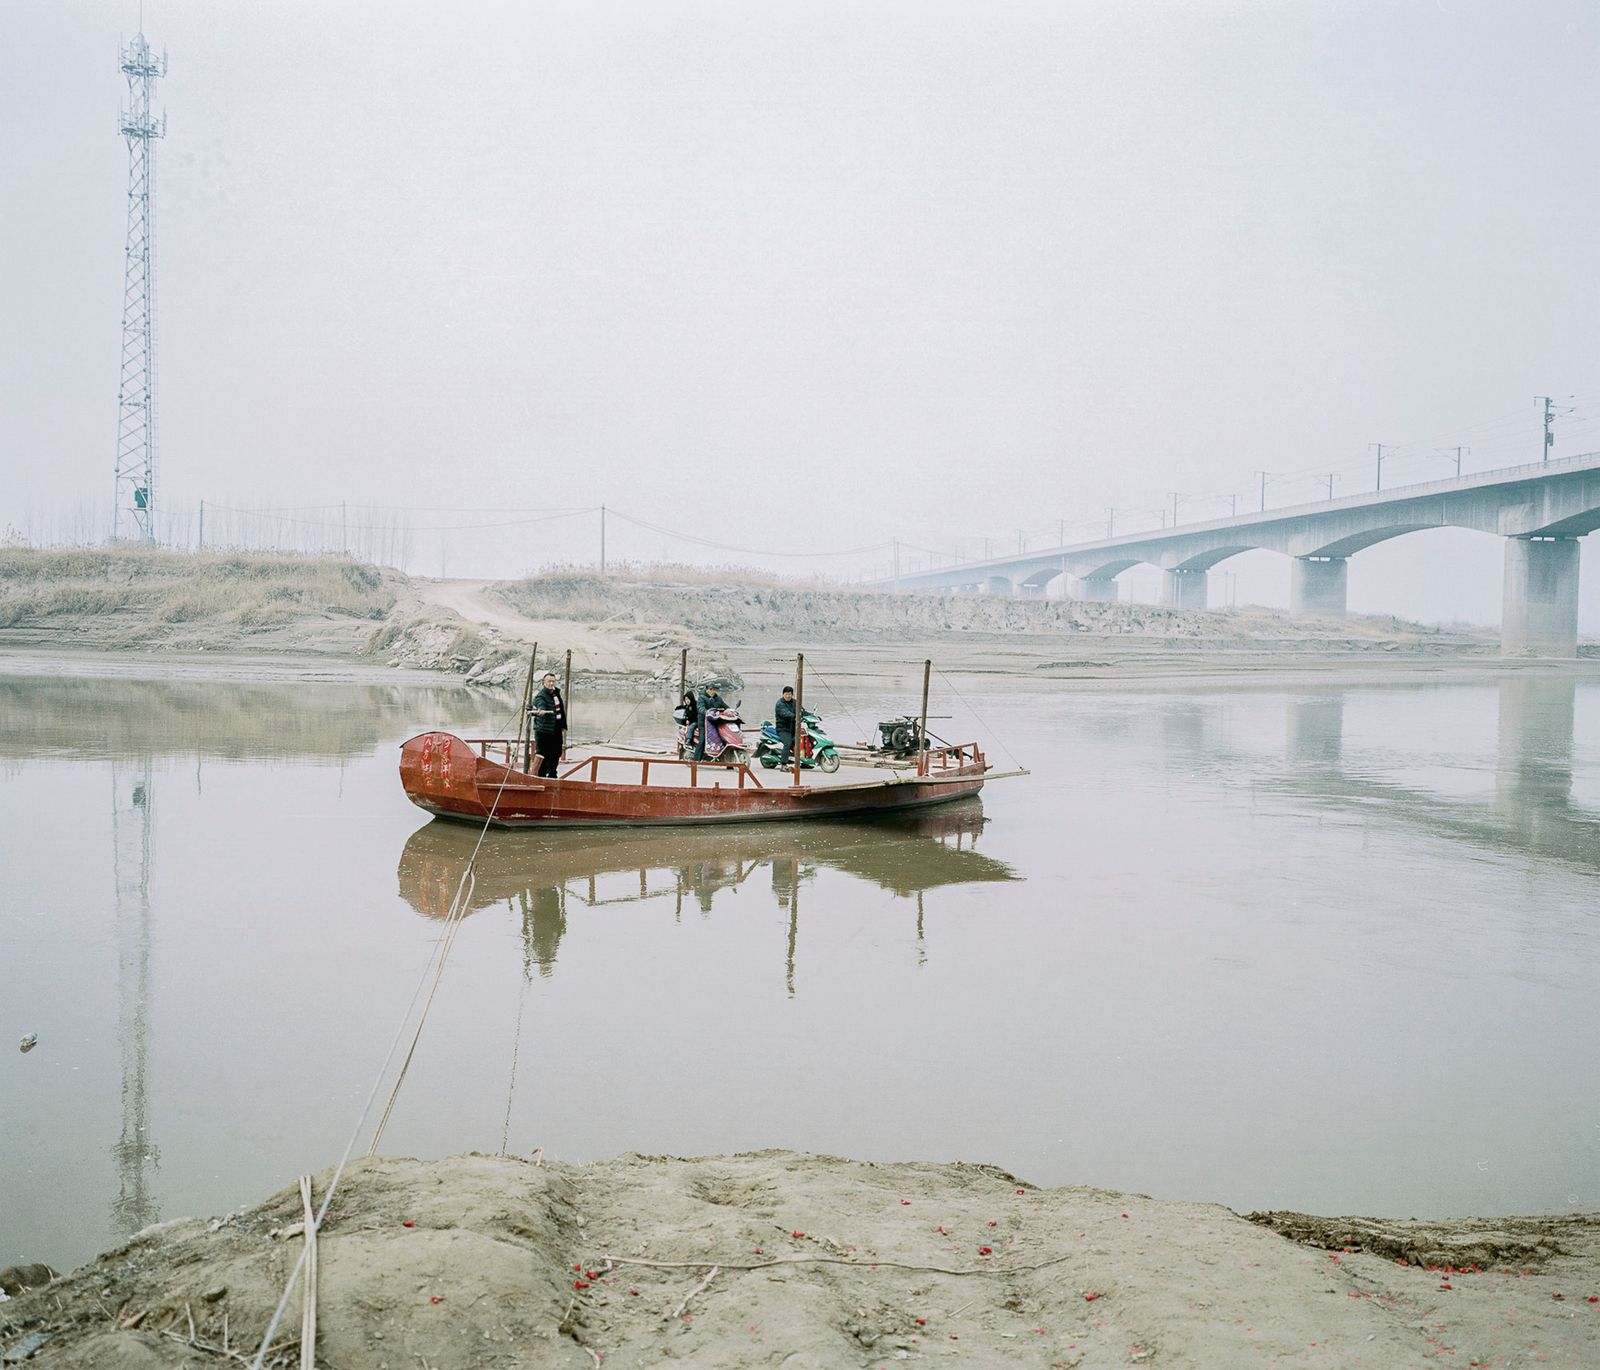 © Pan Wang - Image from the The Wei River is vast photography project